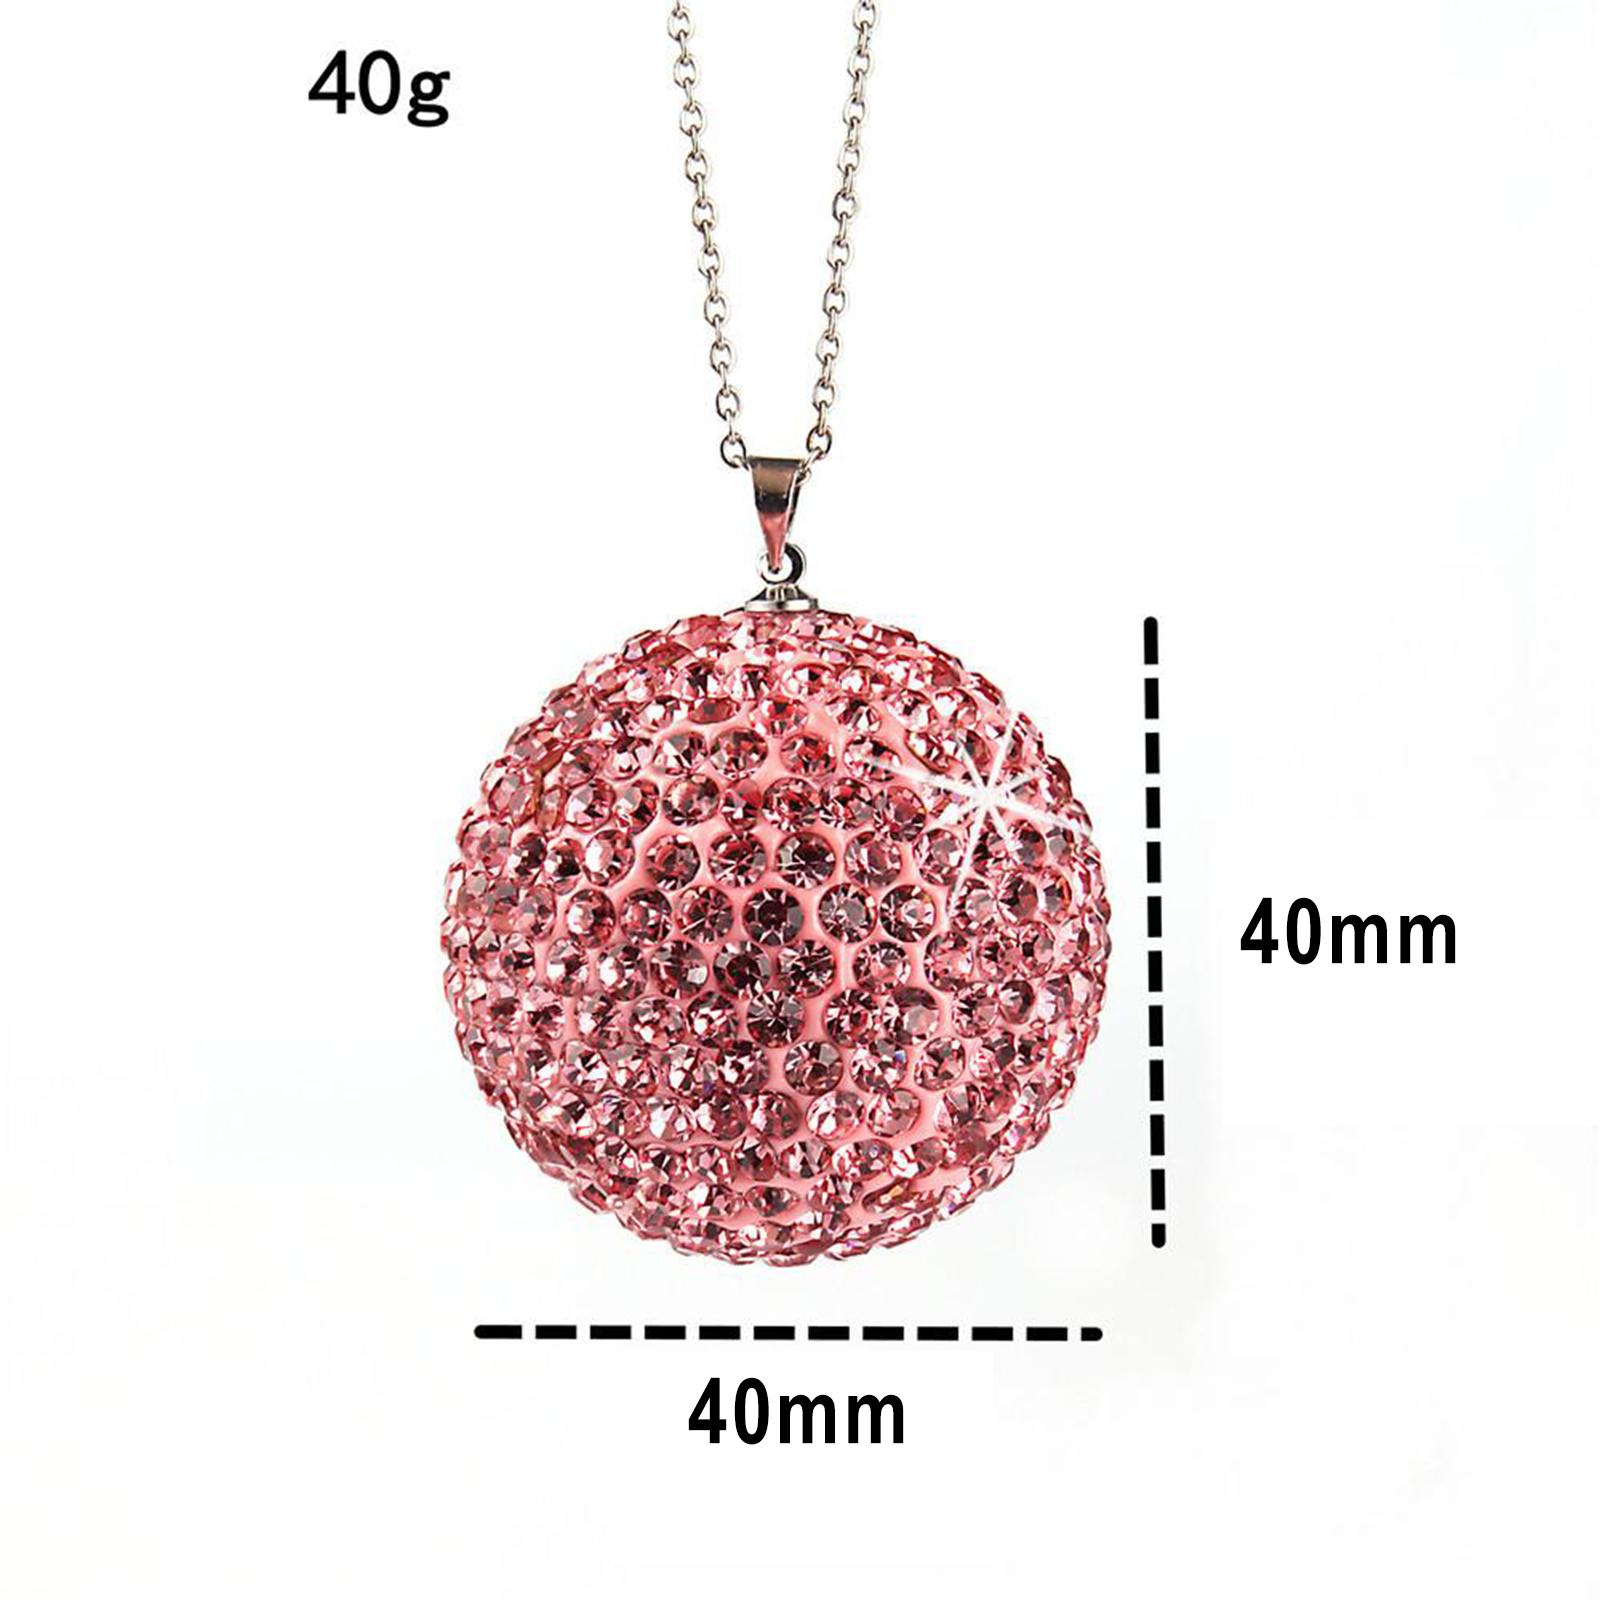 Diamond Crystal Ball Cars Charms Car Pendant for Ornament Rear View Mirror AB color